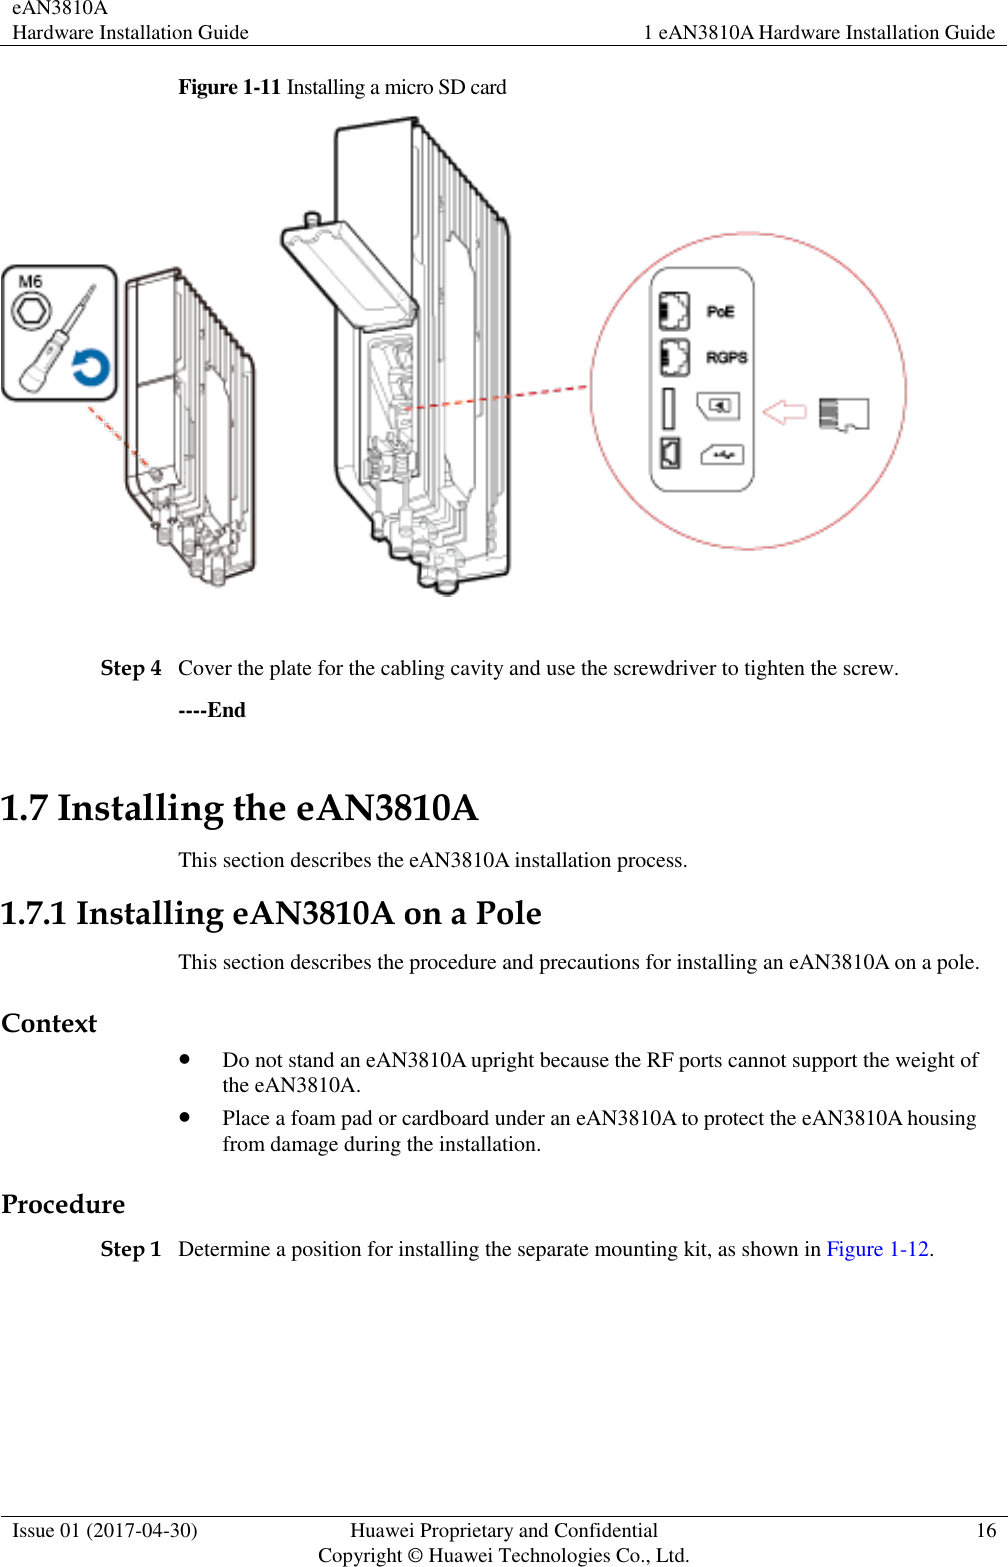 eAN3810A   Hardware Installation Guide 1 eAN3810A Hardware Installation Guide  Issue 01 (2017-04-30) Huawei Proprietary and Confidential                                     Copyright © Huawei Technologies Co., Ltd. 16  Figure 1-11 Installing a micro SD card   Step 4 Cover the plate for the cabling cavity and use the screwdriver to tighten the screw. ----End 1.7 Installing the eAN3810A This section describes the eAN3810A installation process. 1.7.1 Installing eAN3810A on a Pole This section describes the procedure and precautions for installing an eAN3810A on a pole. Context  Do not stand an eAN3810A upright because the RF ports cannot support the weight of the eAN3810A.  Place a foam pad or cardboard under an eAN3810A to protect the eAN3810A housing from damage during the installation. Procedure Step 1 Determine a position for installing the separate mounting kit, as shown in Figure 1-12. 